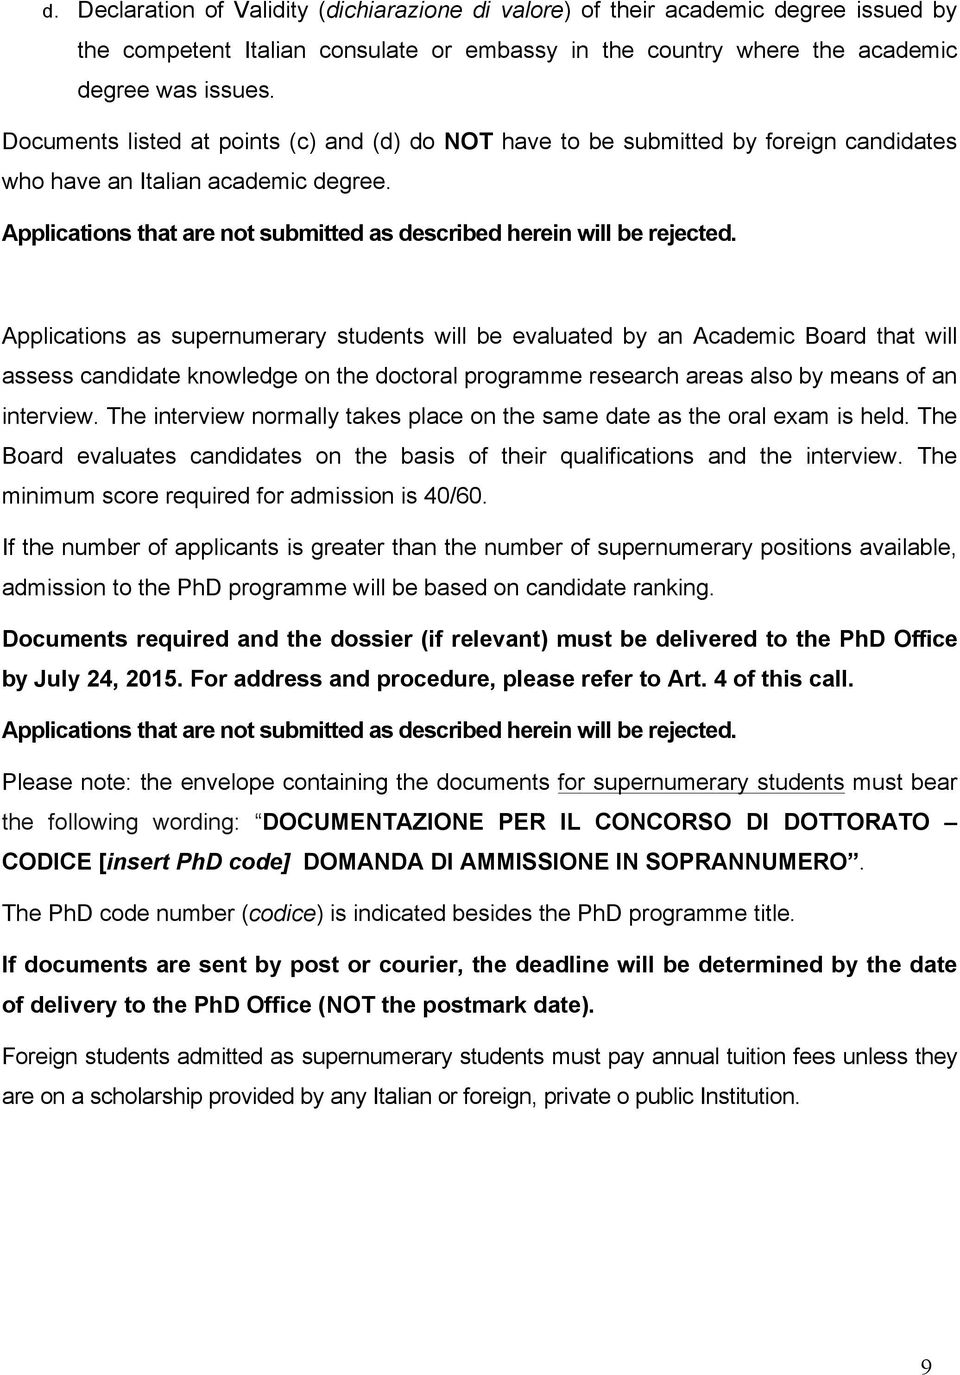 Applications as supernumerary students will be evaluated by an Academic Board that will assess candidate knowledge on the doctoral programme research areas also by means of an interview.